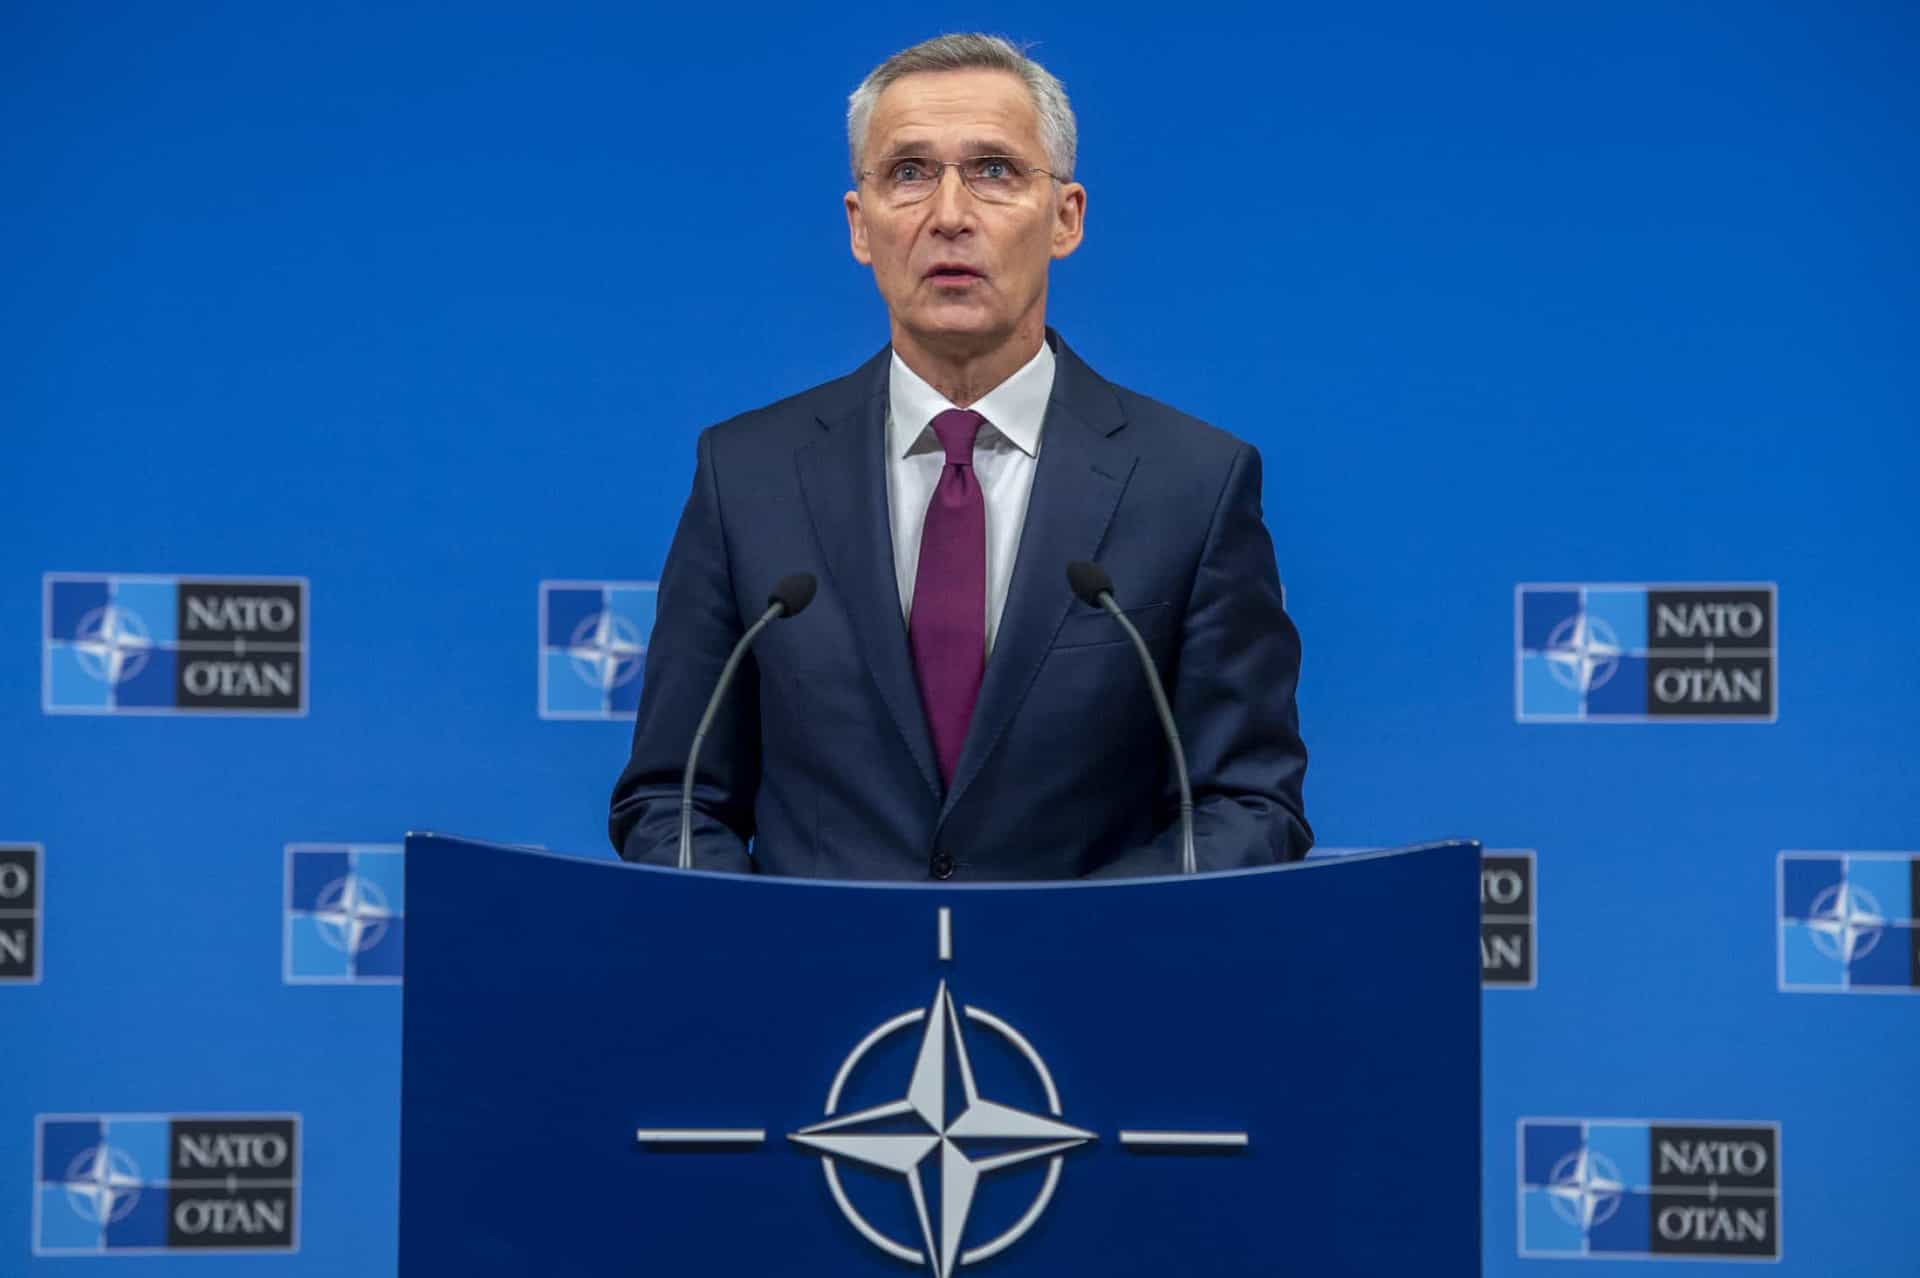 <p>Sources: (<a href="https://www.nato.int/cps/en/natohq/organisation.htm" rel="noopener">NATO</a>) (<a href="https://www.theguardian.com/theguardian/from-the-archive-blog/2019/apr/03/nato-north-atlantic-pact-signed-a-shield-against-aggression-april-1949" rel="noopener">The Guardian 1</a> and <a href="https://www.theguardian.com/commentisfree/2009/mar/24/serbia-kosovo" rel="noopener">2</a>) (<a href="https://time.com/5564207/russia-nato-relationship/" rel="noopener">TIME</a>) (<a href="https://www.sipri.org/media/press-release/2018/global-military-spending-remains-high-17-trillion" rel="noopener">Stockholm International Peace Research Institute</a>) (<a href="https://www.macrotrends.net/countries/ISL/iceland/military-spending-defense-budget" rel="noopener">Macrotrends</a>) (<a href="https://www.google.com/books/edition/The_Military_Balance_2021/SB4gEAAAQBAJ?hl=en&gbpv=1&pg=PA114&printsec=frontcover" rel="noopener">The International Institute for Strategic Studies</a>) (<a href="https://www.greydynamics.com/operation-gladio-an-introduction/" rel="noopener">Grey Dynamics</a>) (<a href="https://theconversation.com/kosovo-disputes-continue-20-years-after-nato-bombing-campaign-113669" rel="noopener">The Conversation</a>) (<a href="https://reliefweb.int/sites/reliefweb.int/files/resources/6D26FF88119644CFC1256989005CD392-thekosovoreport.pdf" rel="noopener">The Independent International Commission on Kosovo</a>) (<a href="https://apnews.com/article/1fd36ad8beb840cab0d2d1a31fd4e5f2" rel="noopener">Associated Press</a>) (<a href="https://www.bbc.com/news/world-europe-57487869" rel="noopener">BBC</a>) (<a href="https://edition.cnn.com/2022/02/25/politics/nato-ukraine-russia/index.html" rel="noopener">CNN</a>)</p><p>Découvrez aussi: <a class="gs-title" href="https://www.starsinsider.com/fr/lifestyle/451359/ce-que-les-nations-unies-ont-accompli-en-plus-de-75-ans" rel="noopener">Ce que les Nations unies ont accompli en plus de 75 ans</a></p>